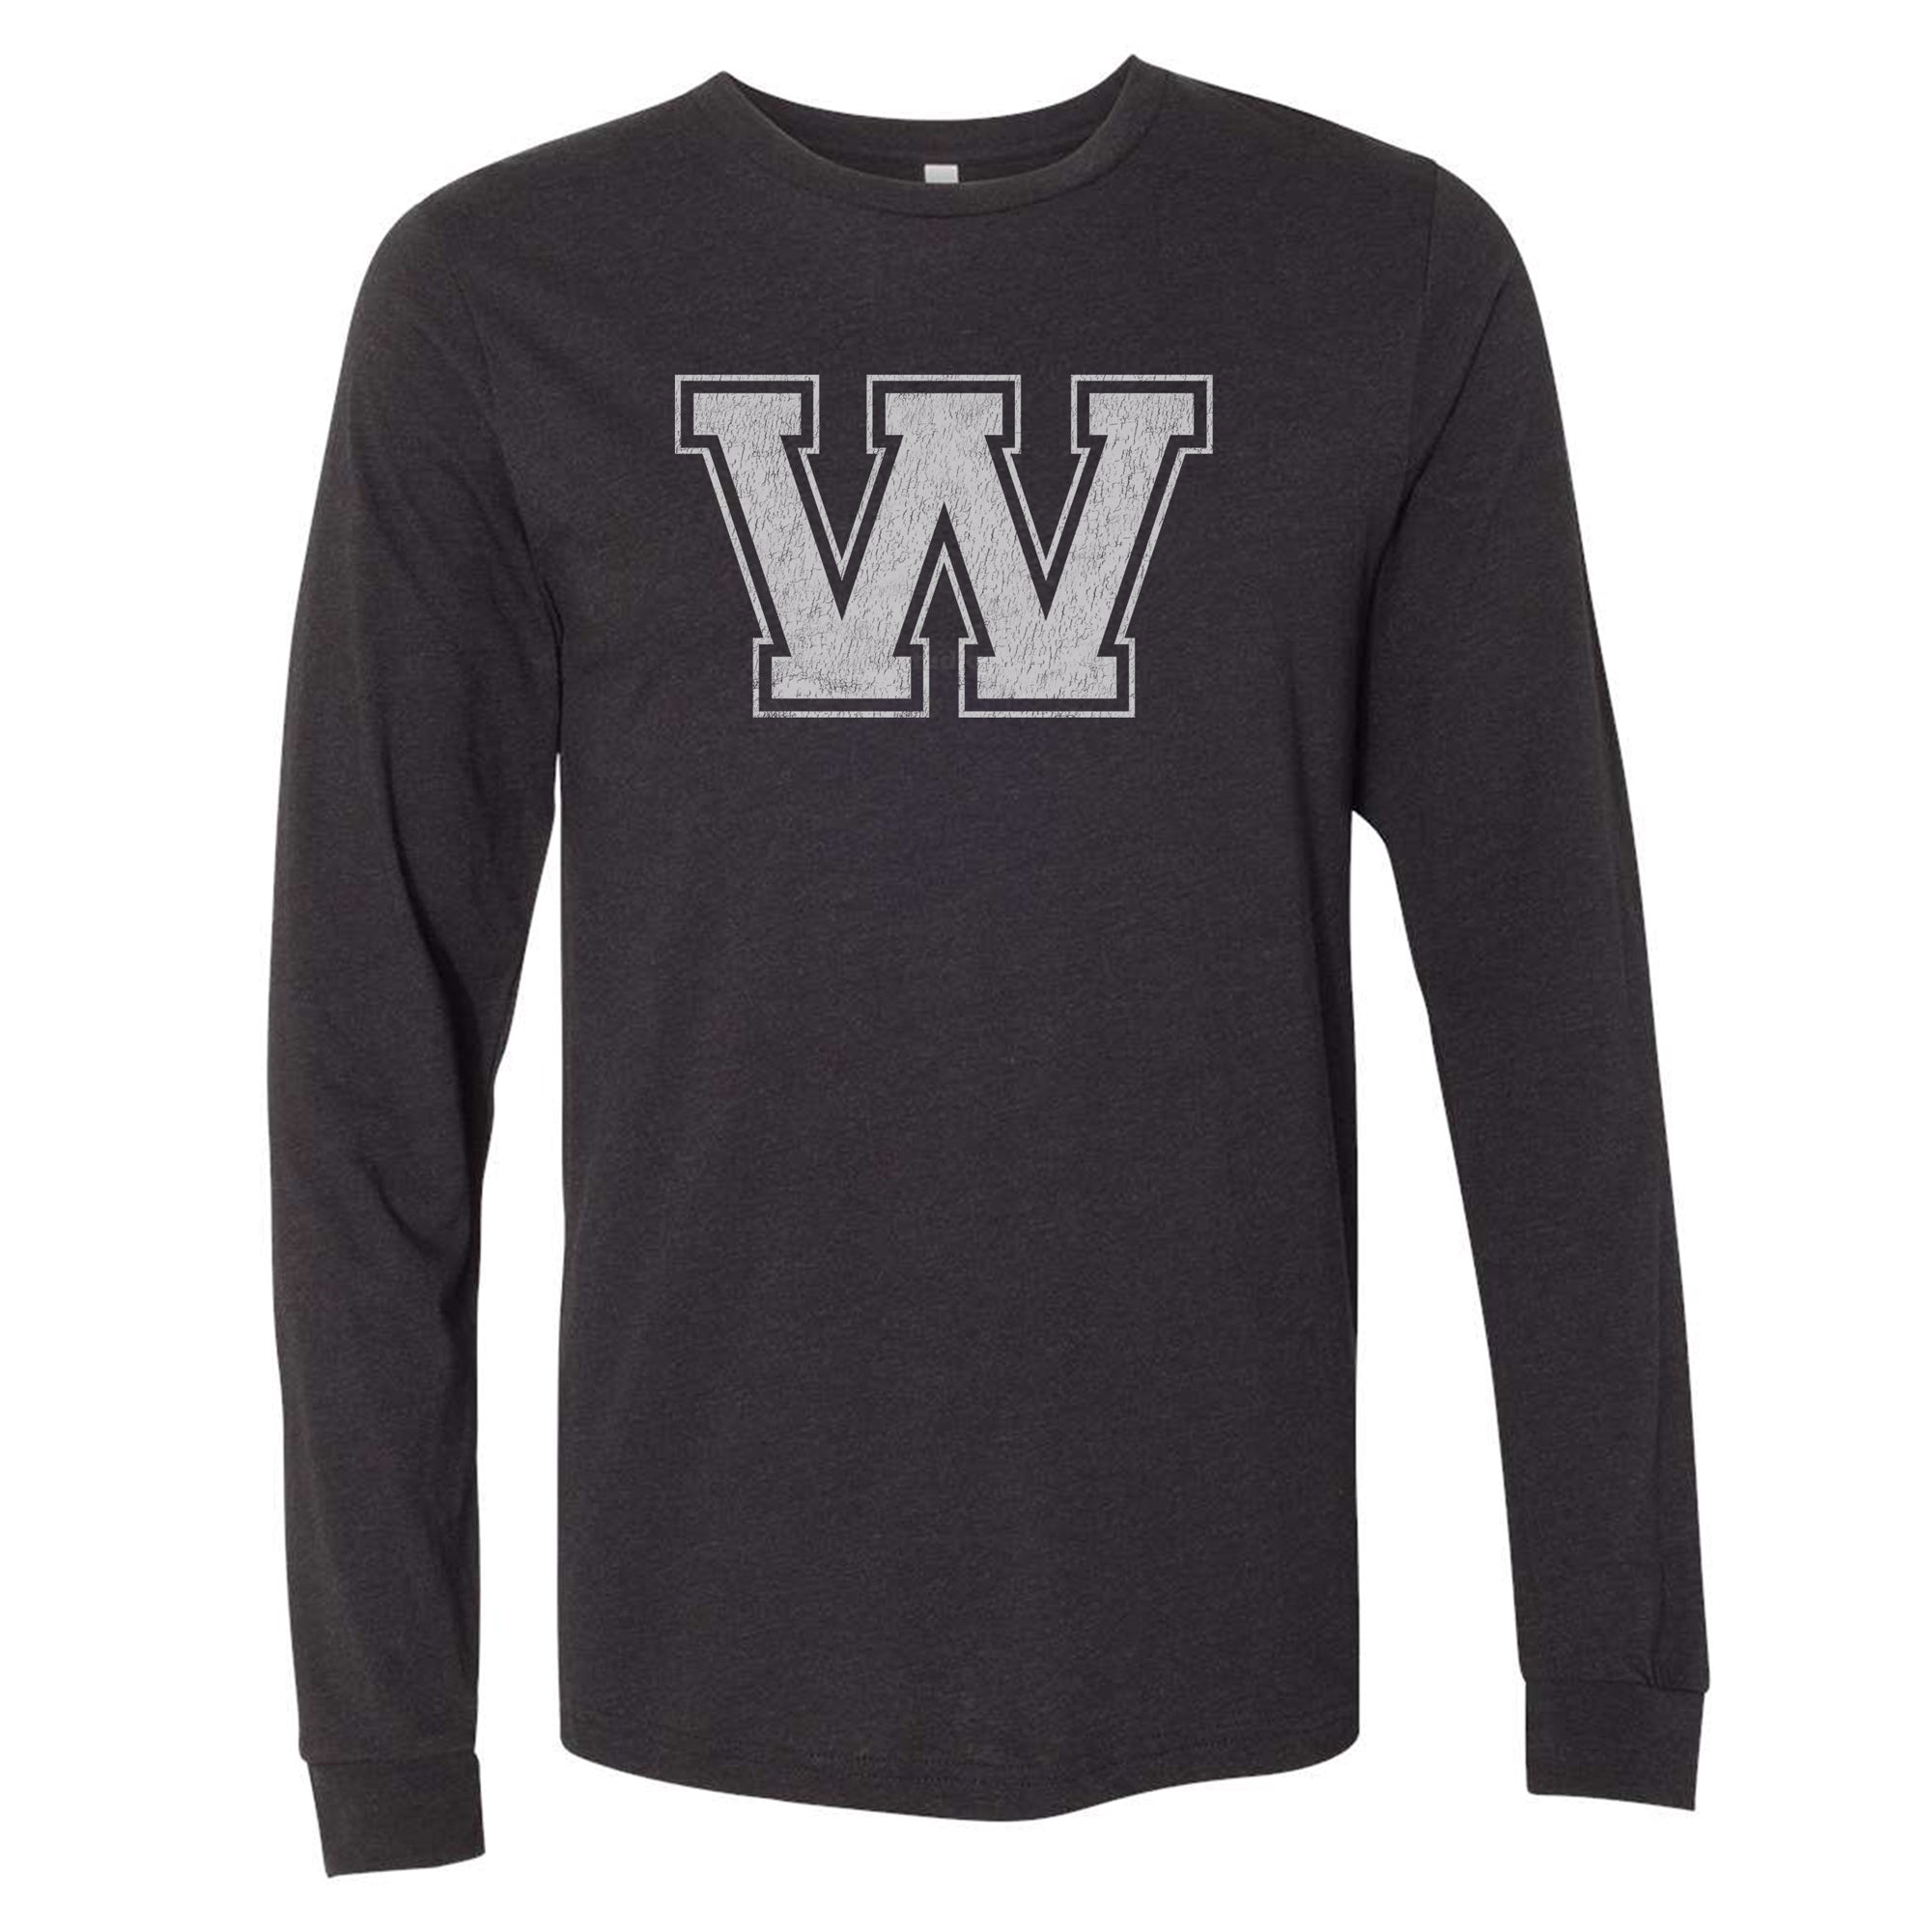 "W" - Vintage - Blended Youth Long Sleeve